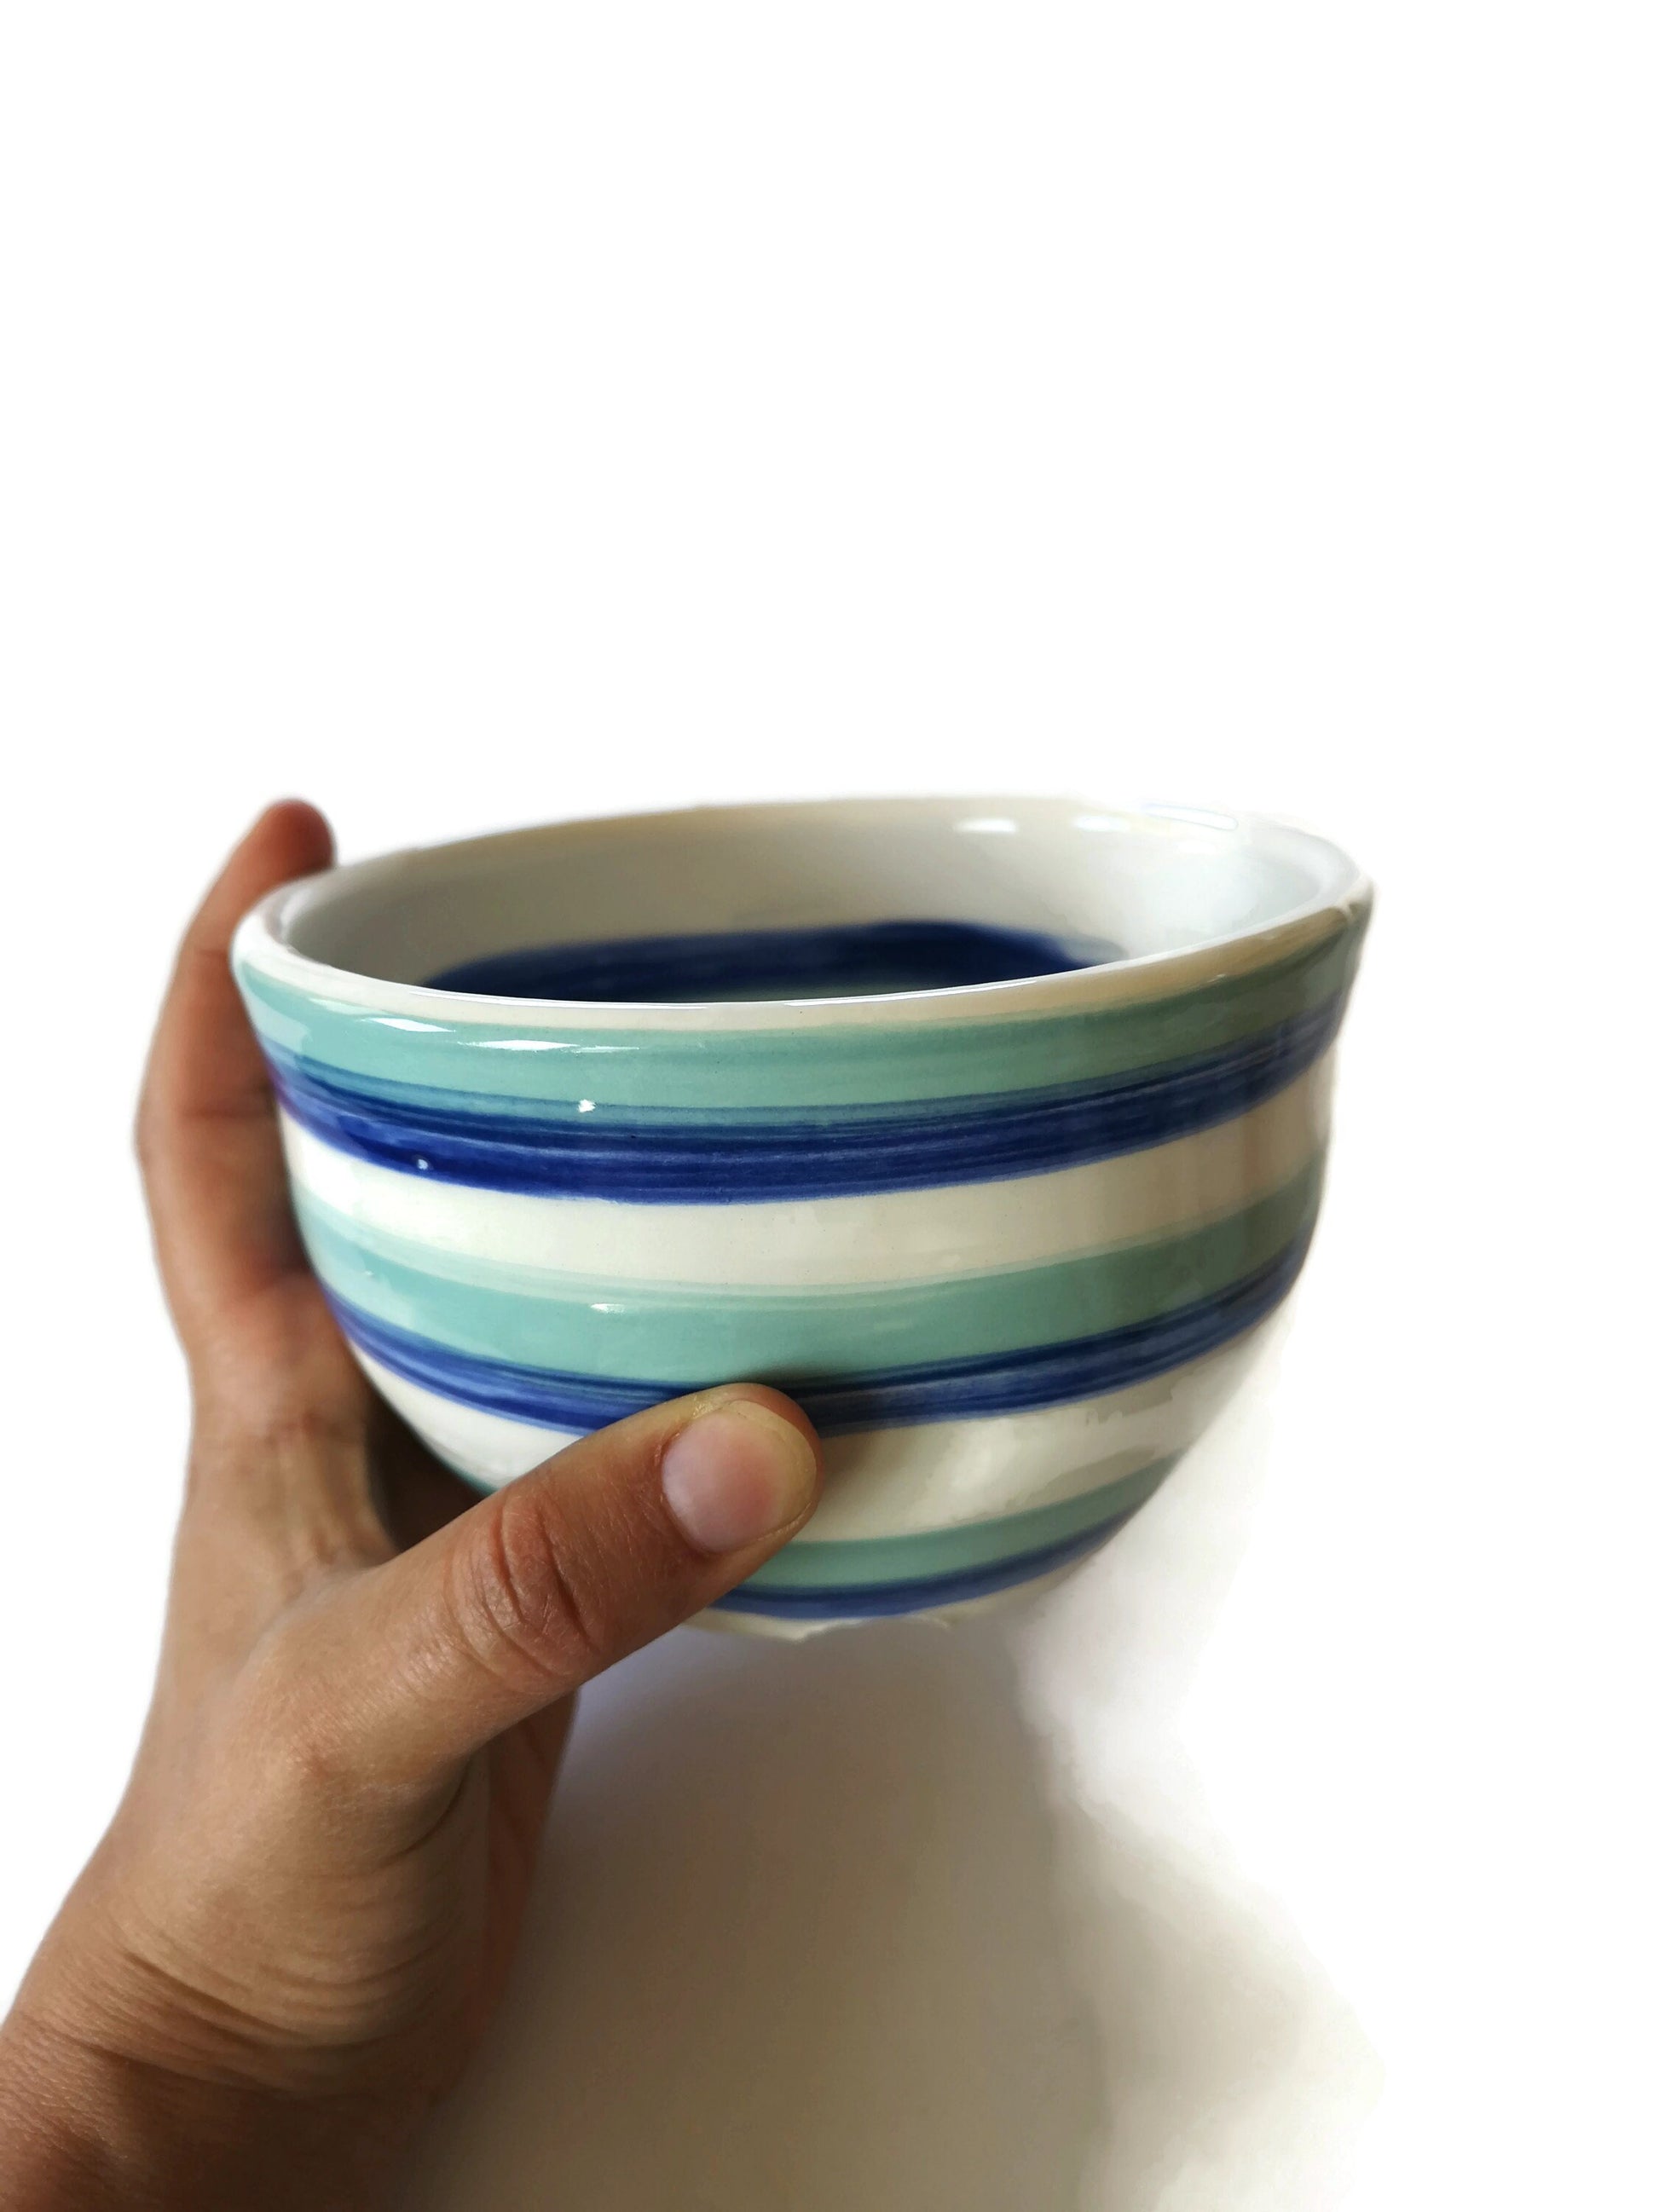 Hand Painted Turquoise Blue Striped Bowl, housewarming gift first home for her, Mom Birthday Gifts From Daughter, Best Sellers Pasta Bowls - Ceramica Ana Rafael